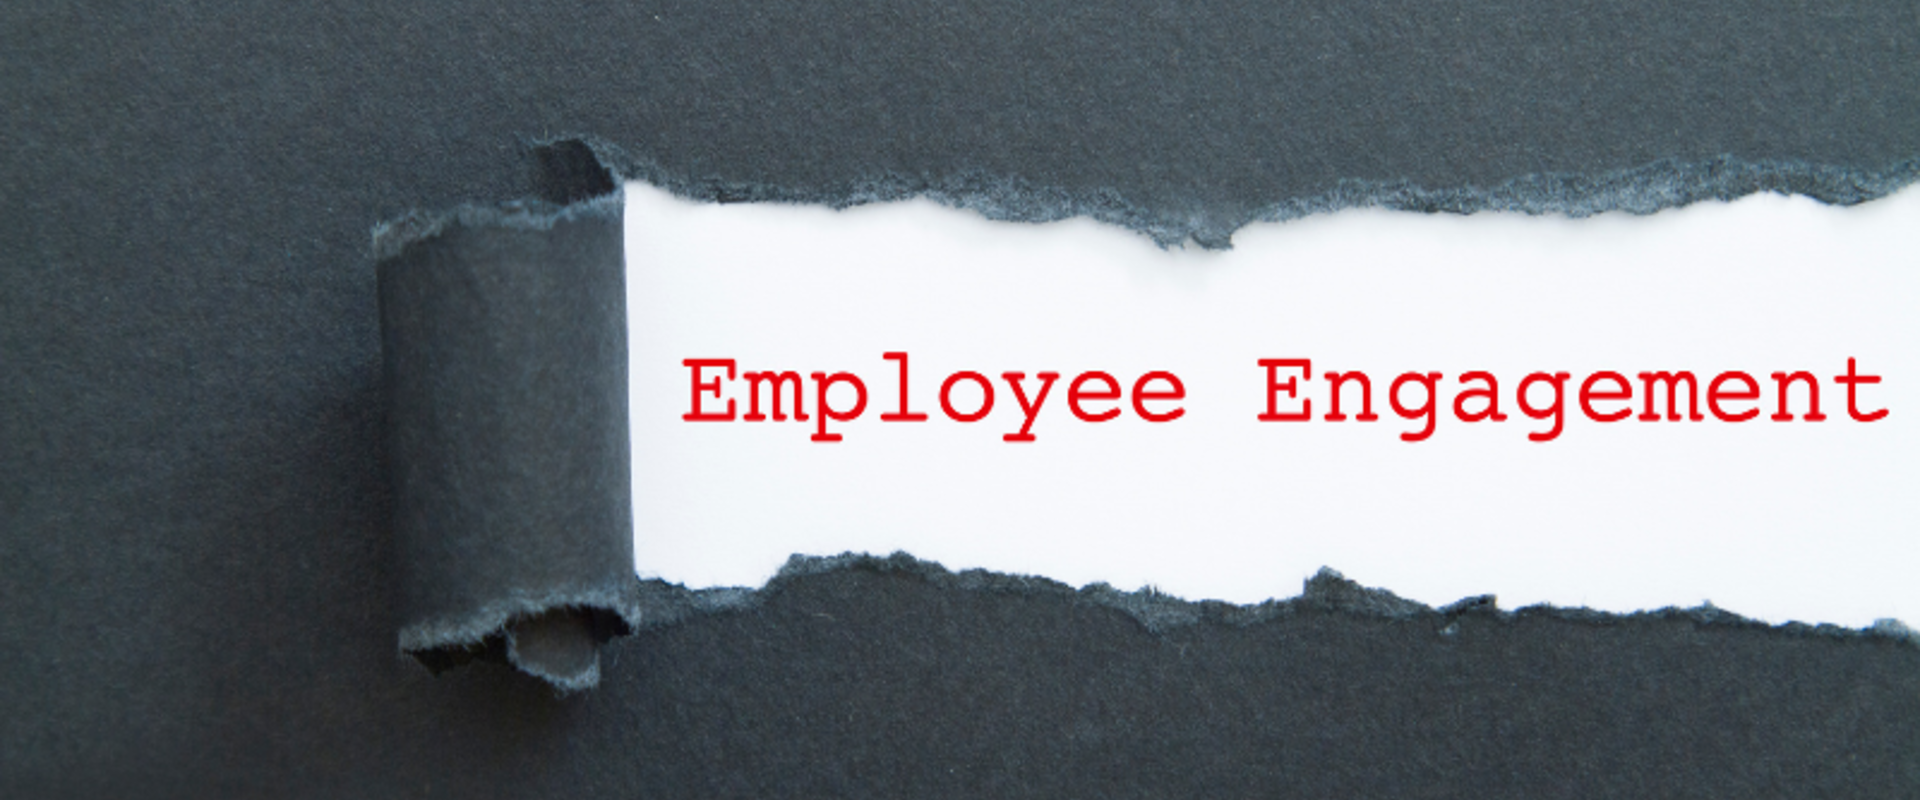 What is Employee Engagement and Why Does it Matter?